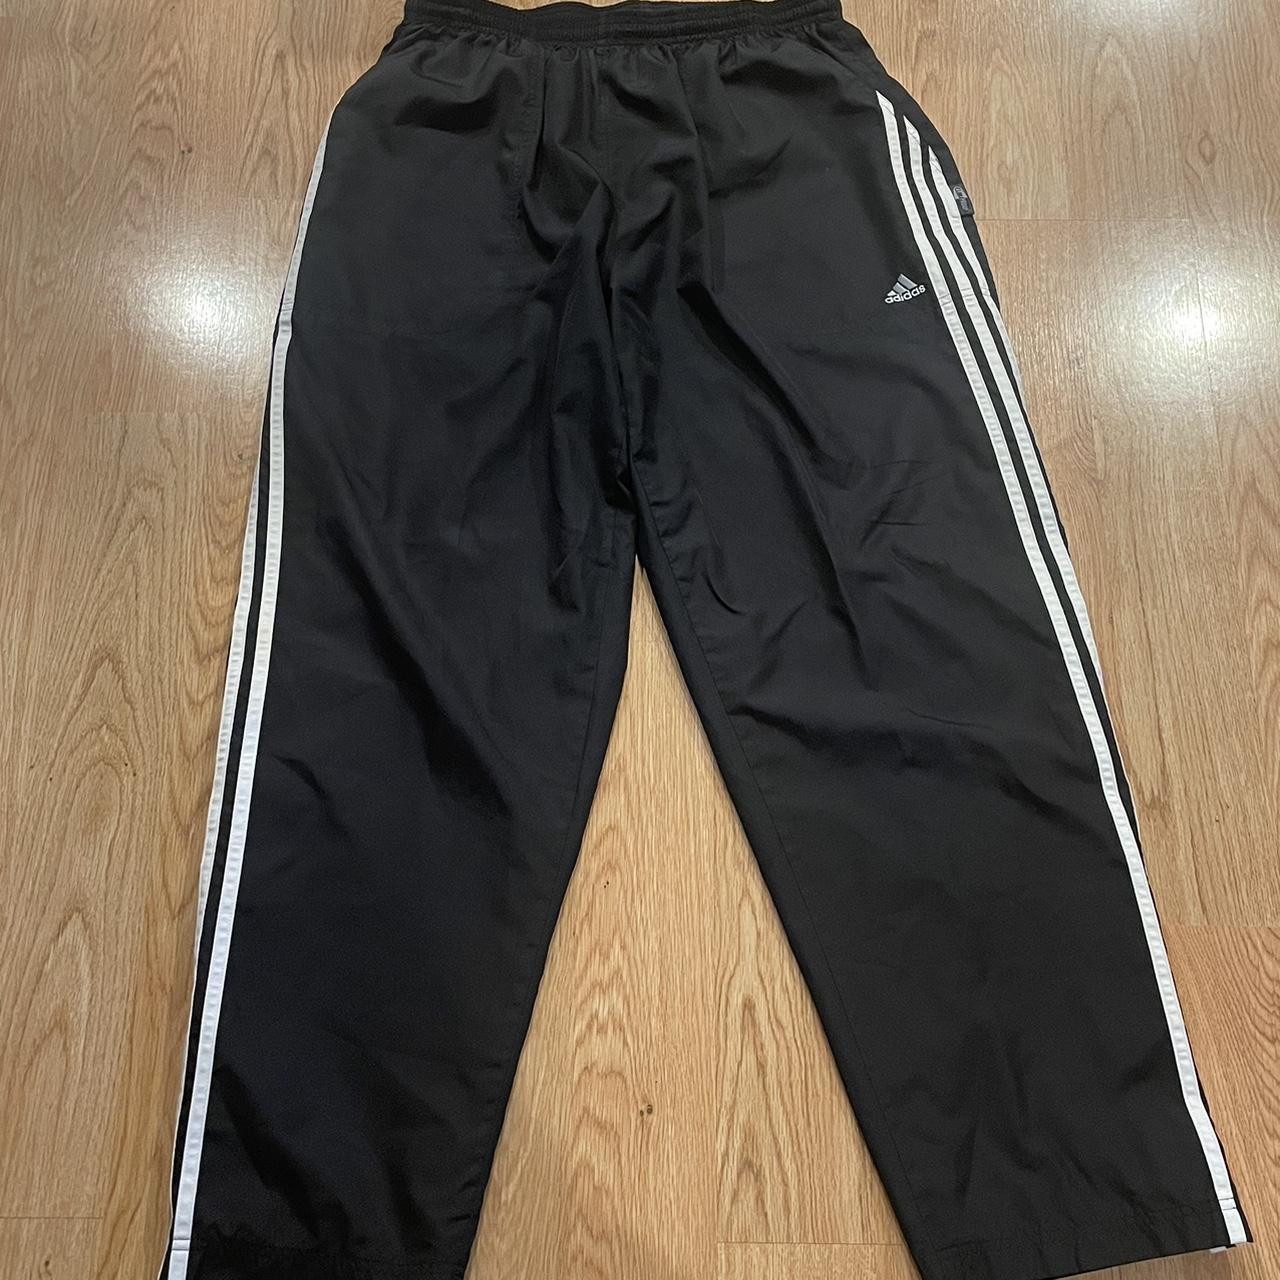 Y2k adidas track pants Size Xl No flaws great condition - Depop